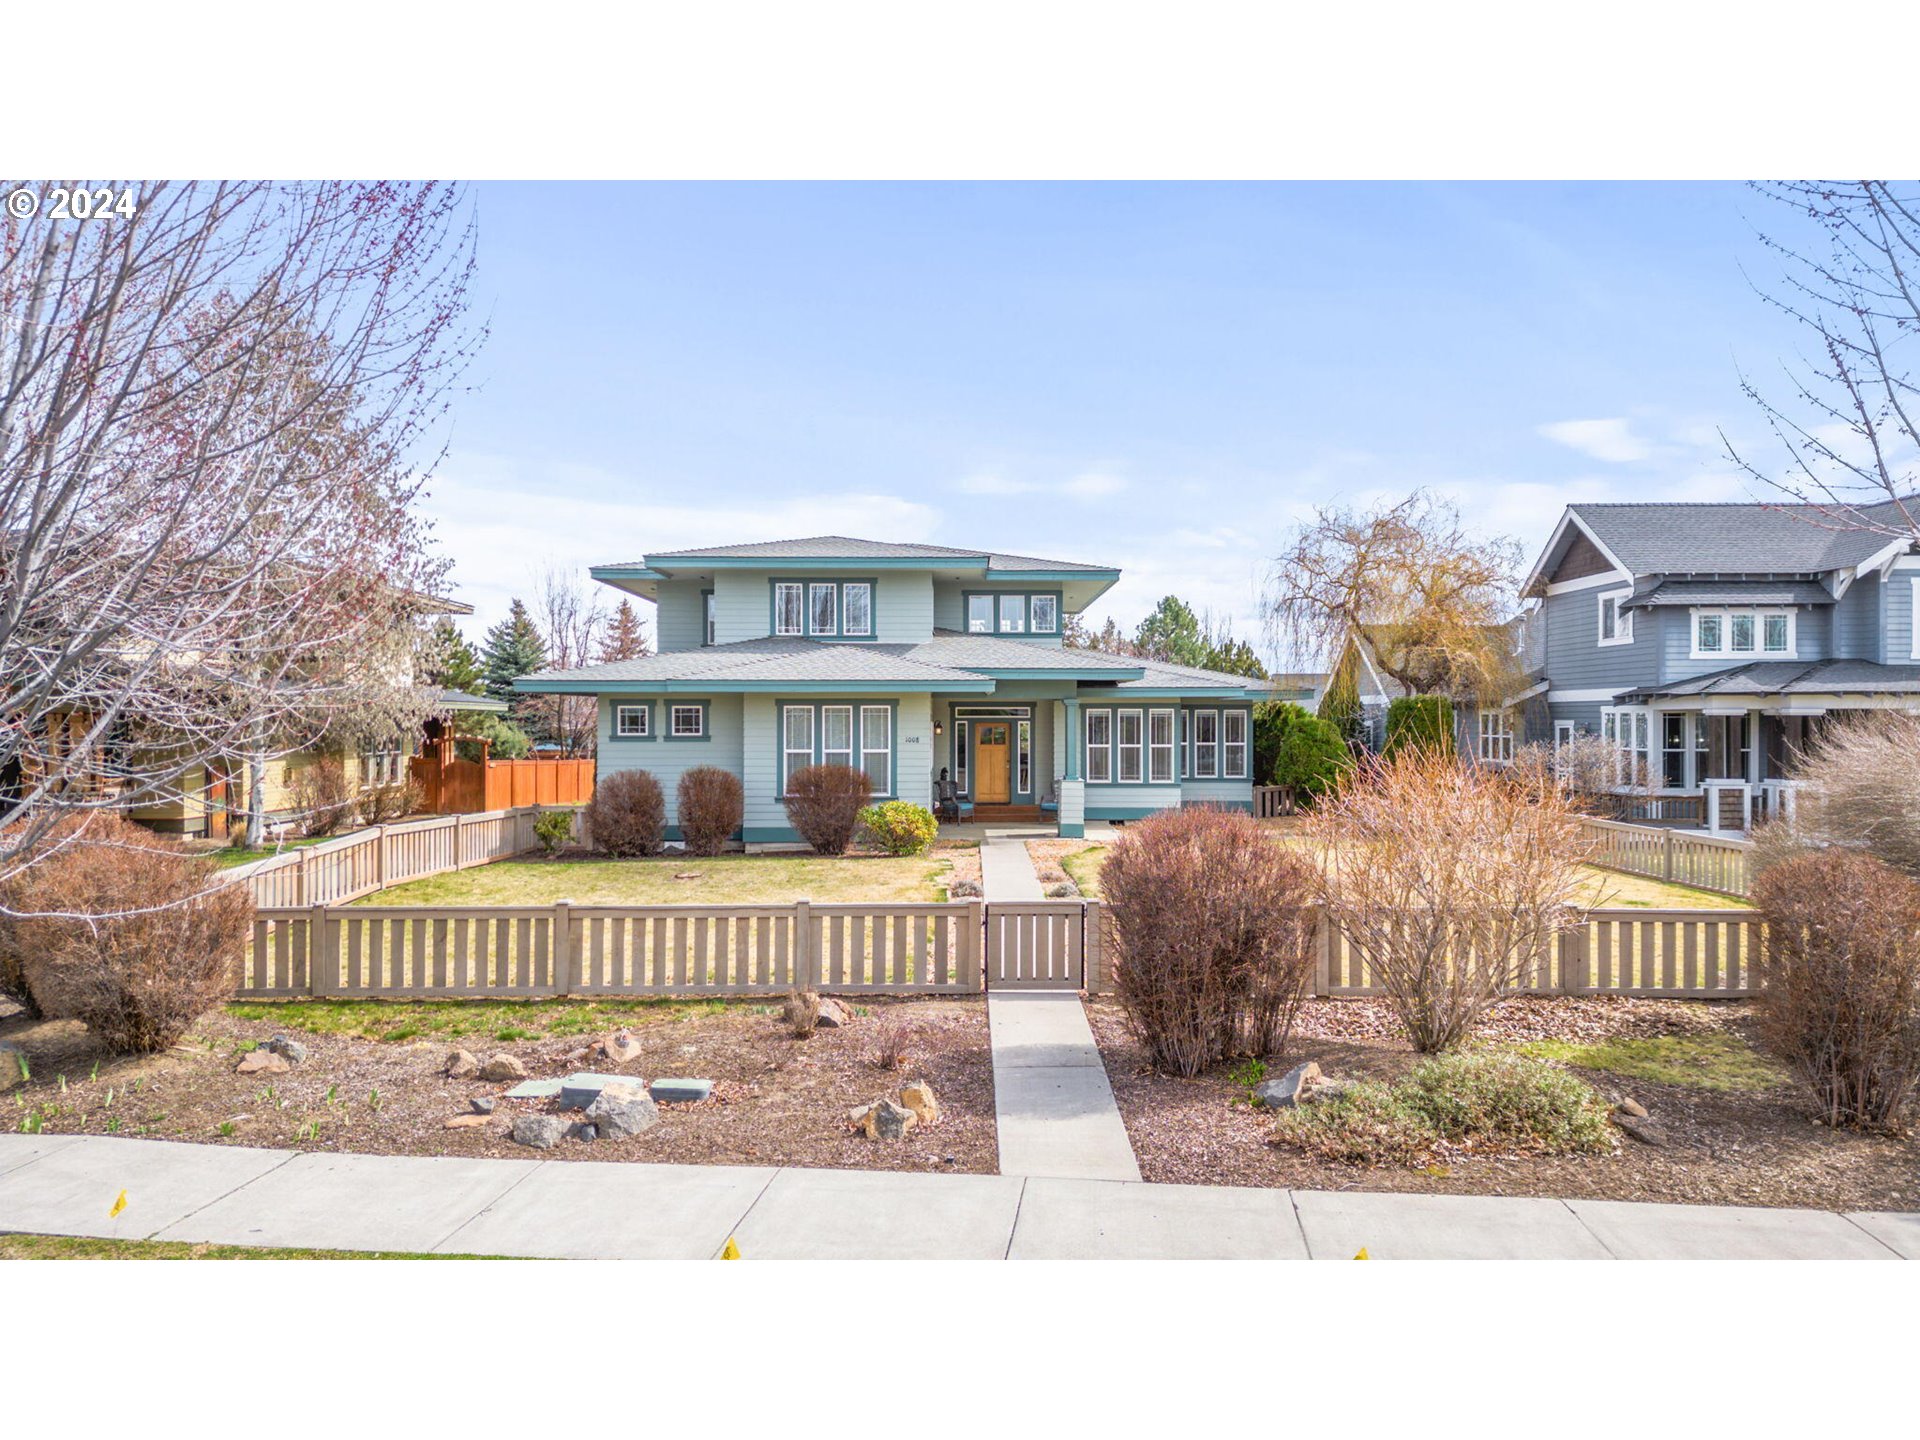 1008 NW 15TH ST, Redmond, OR 